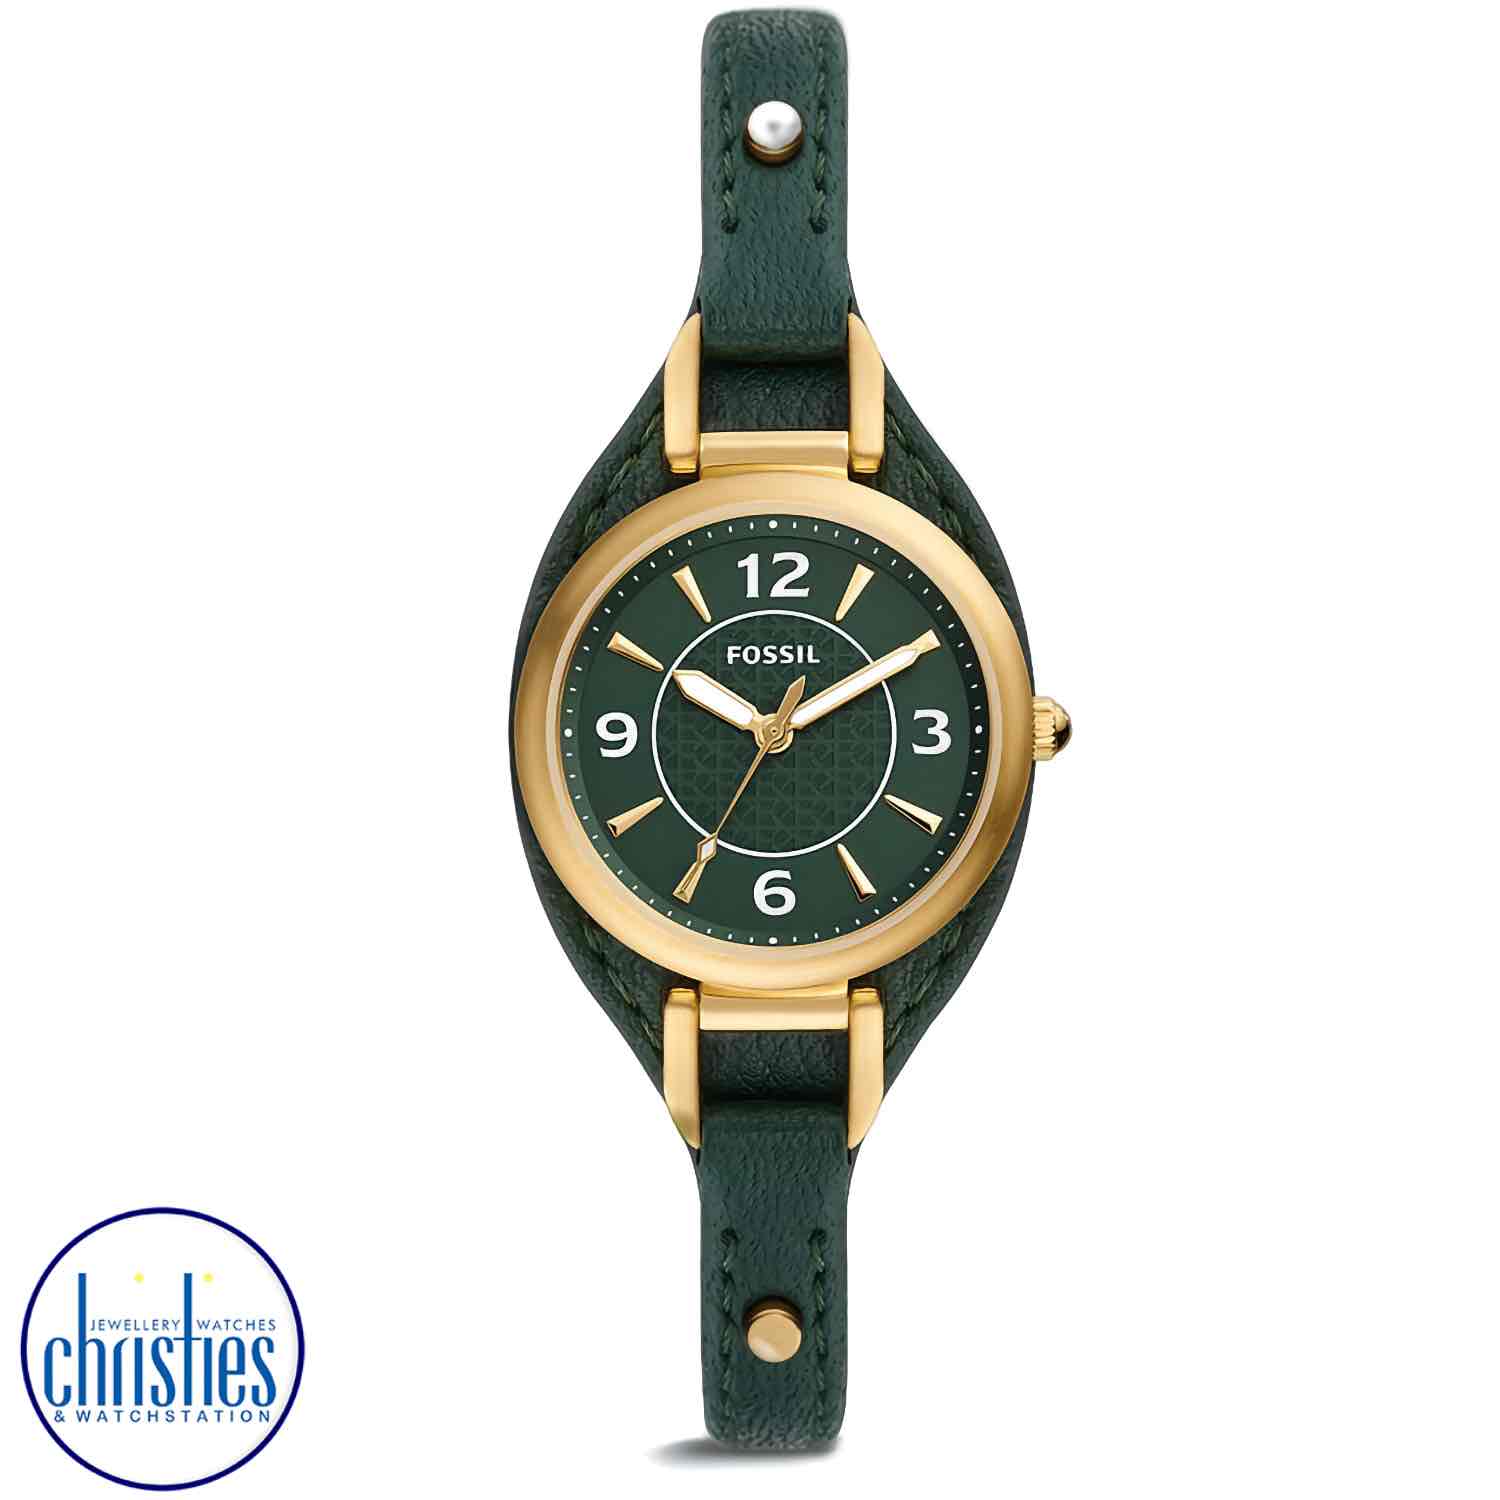 ES5241 Fossil Carlie Three-Hand Green Eco Leather Watch. ME5241 Fossil Carlie Three-Hand Green Eco Leather Watch Afterpay - Split your purchase into 4 instalments - Pay for your purchase over 4 instalments, due every two weeks. fossil mens watches nz